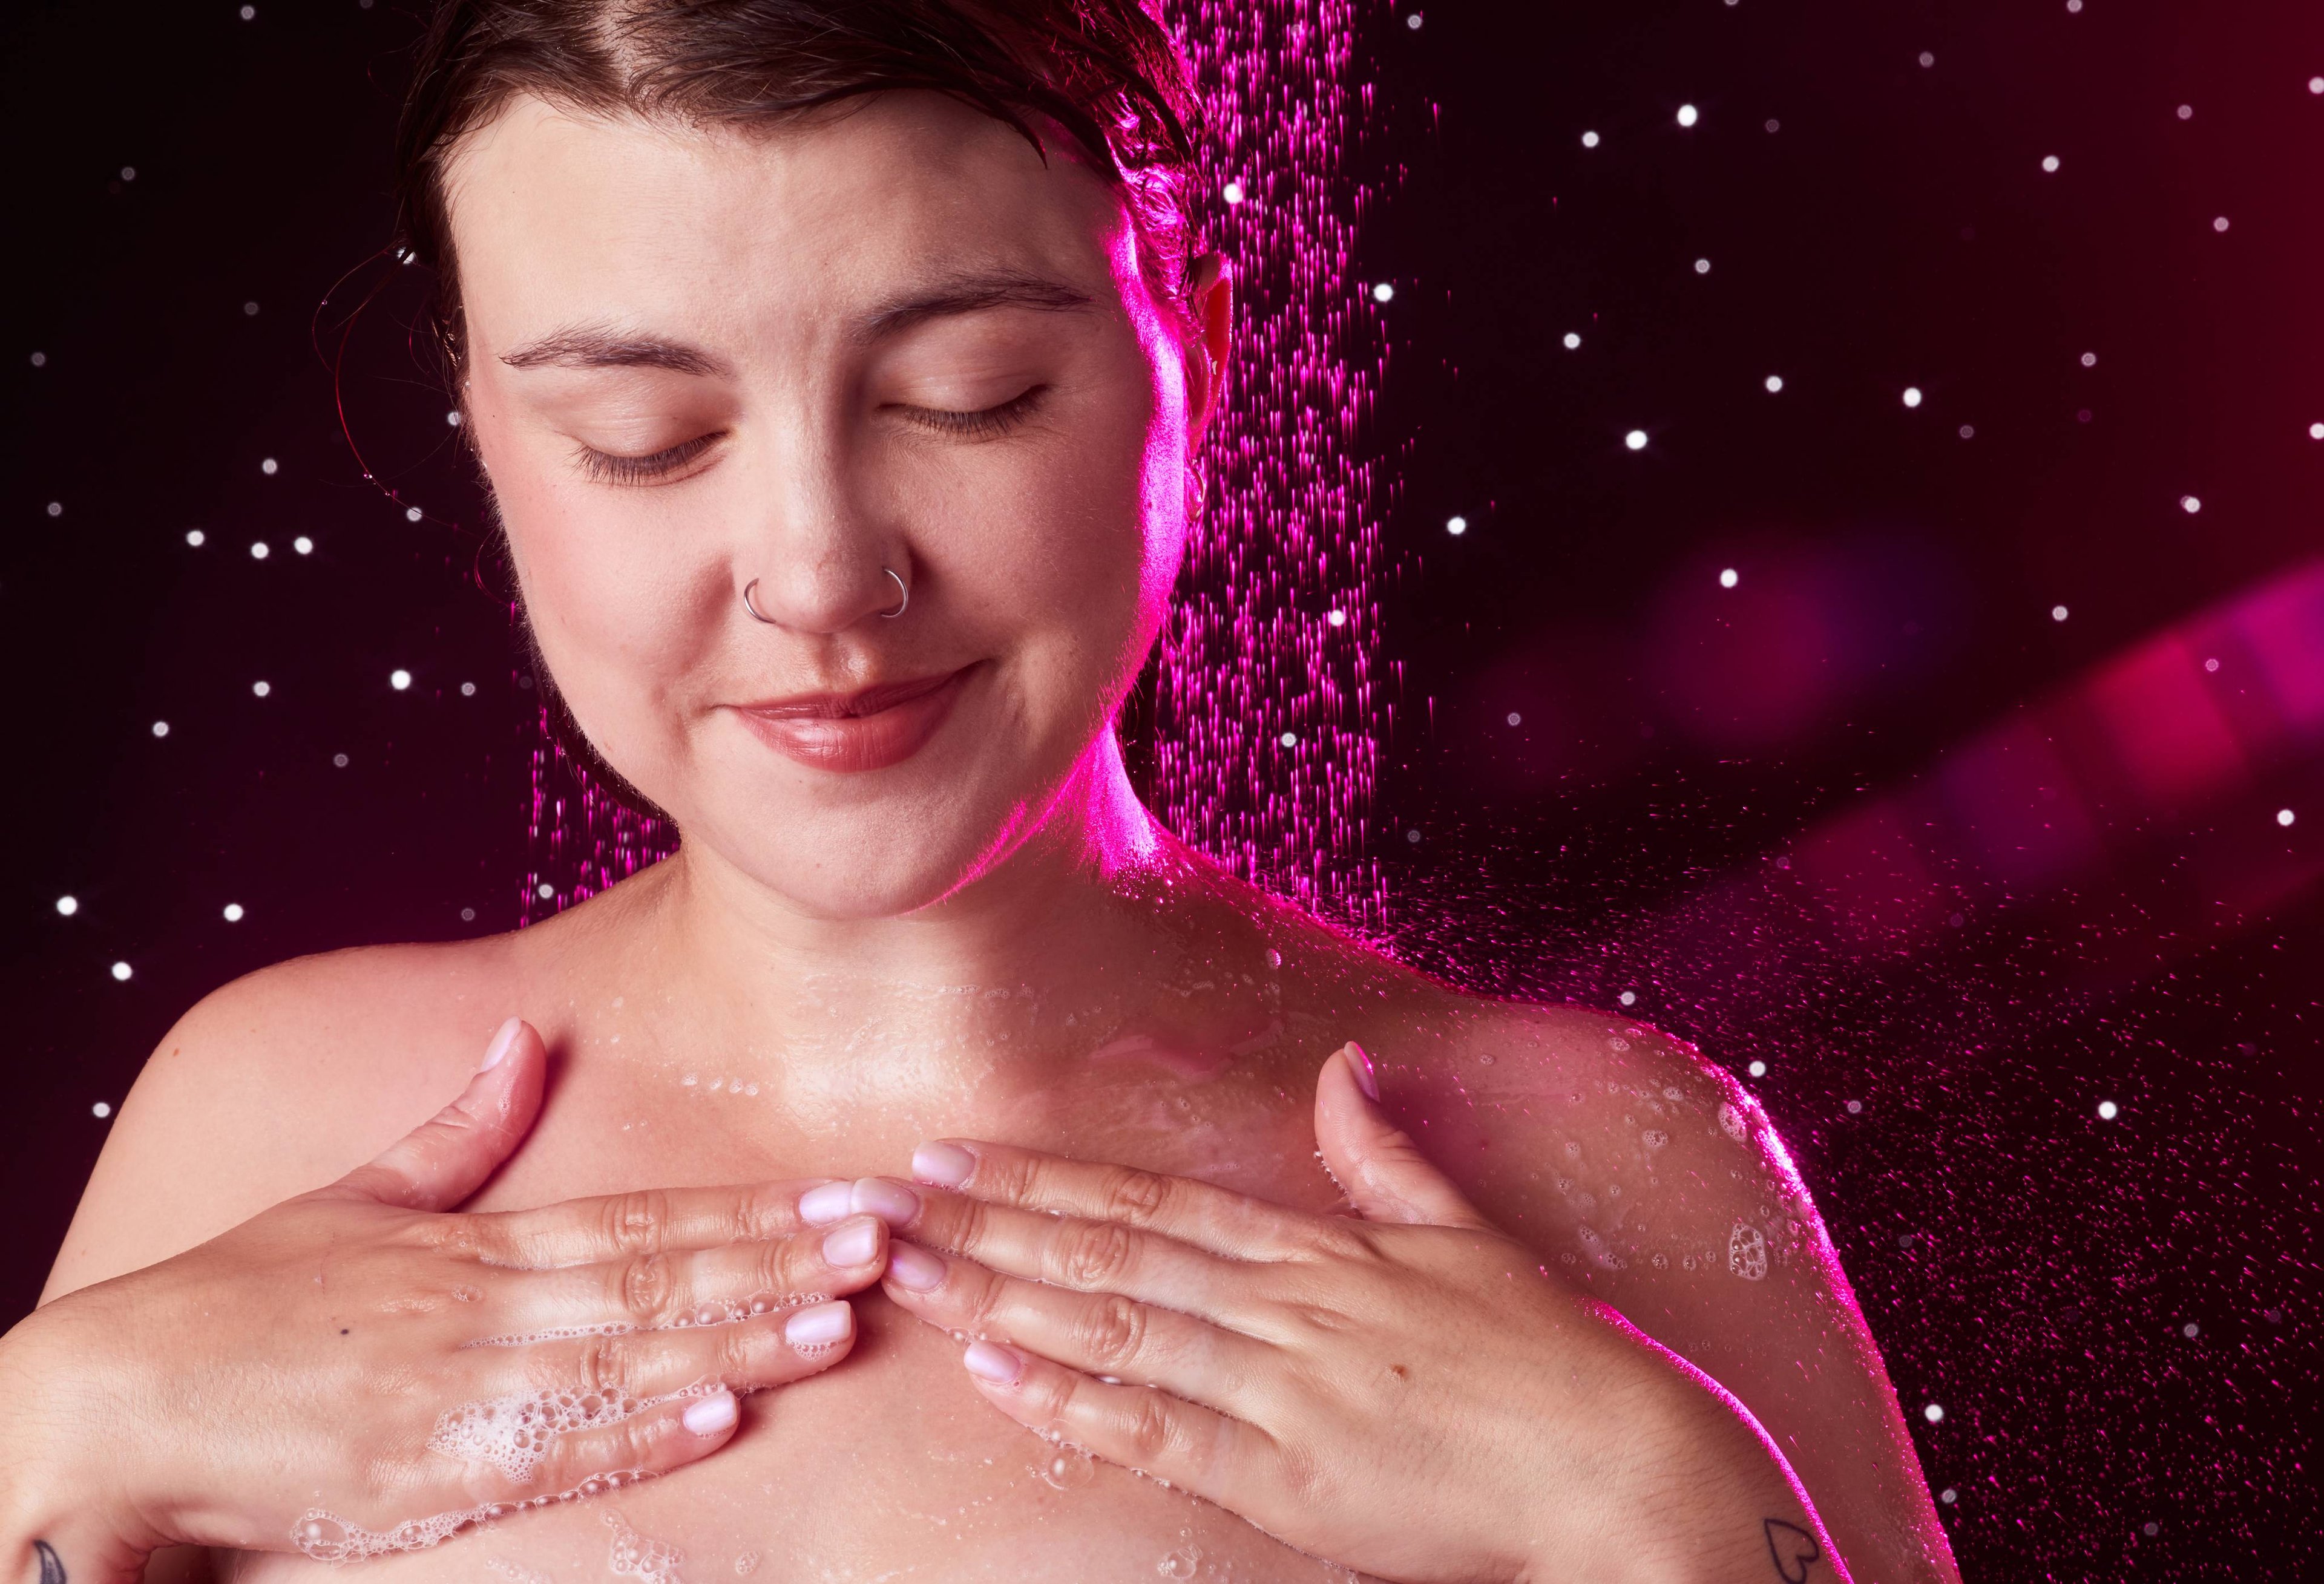 Image shows the model on a twinkling background under running shower water as they later up their chest with both hands. 